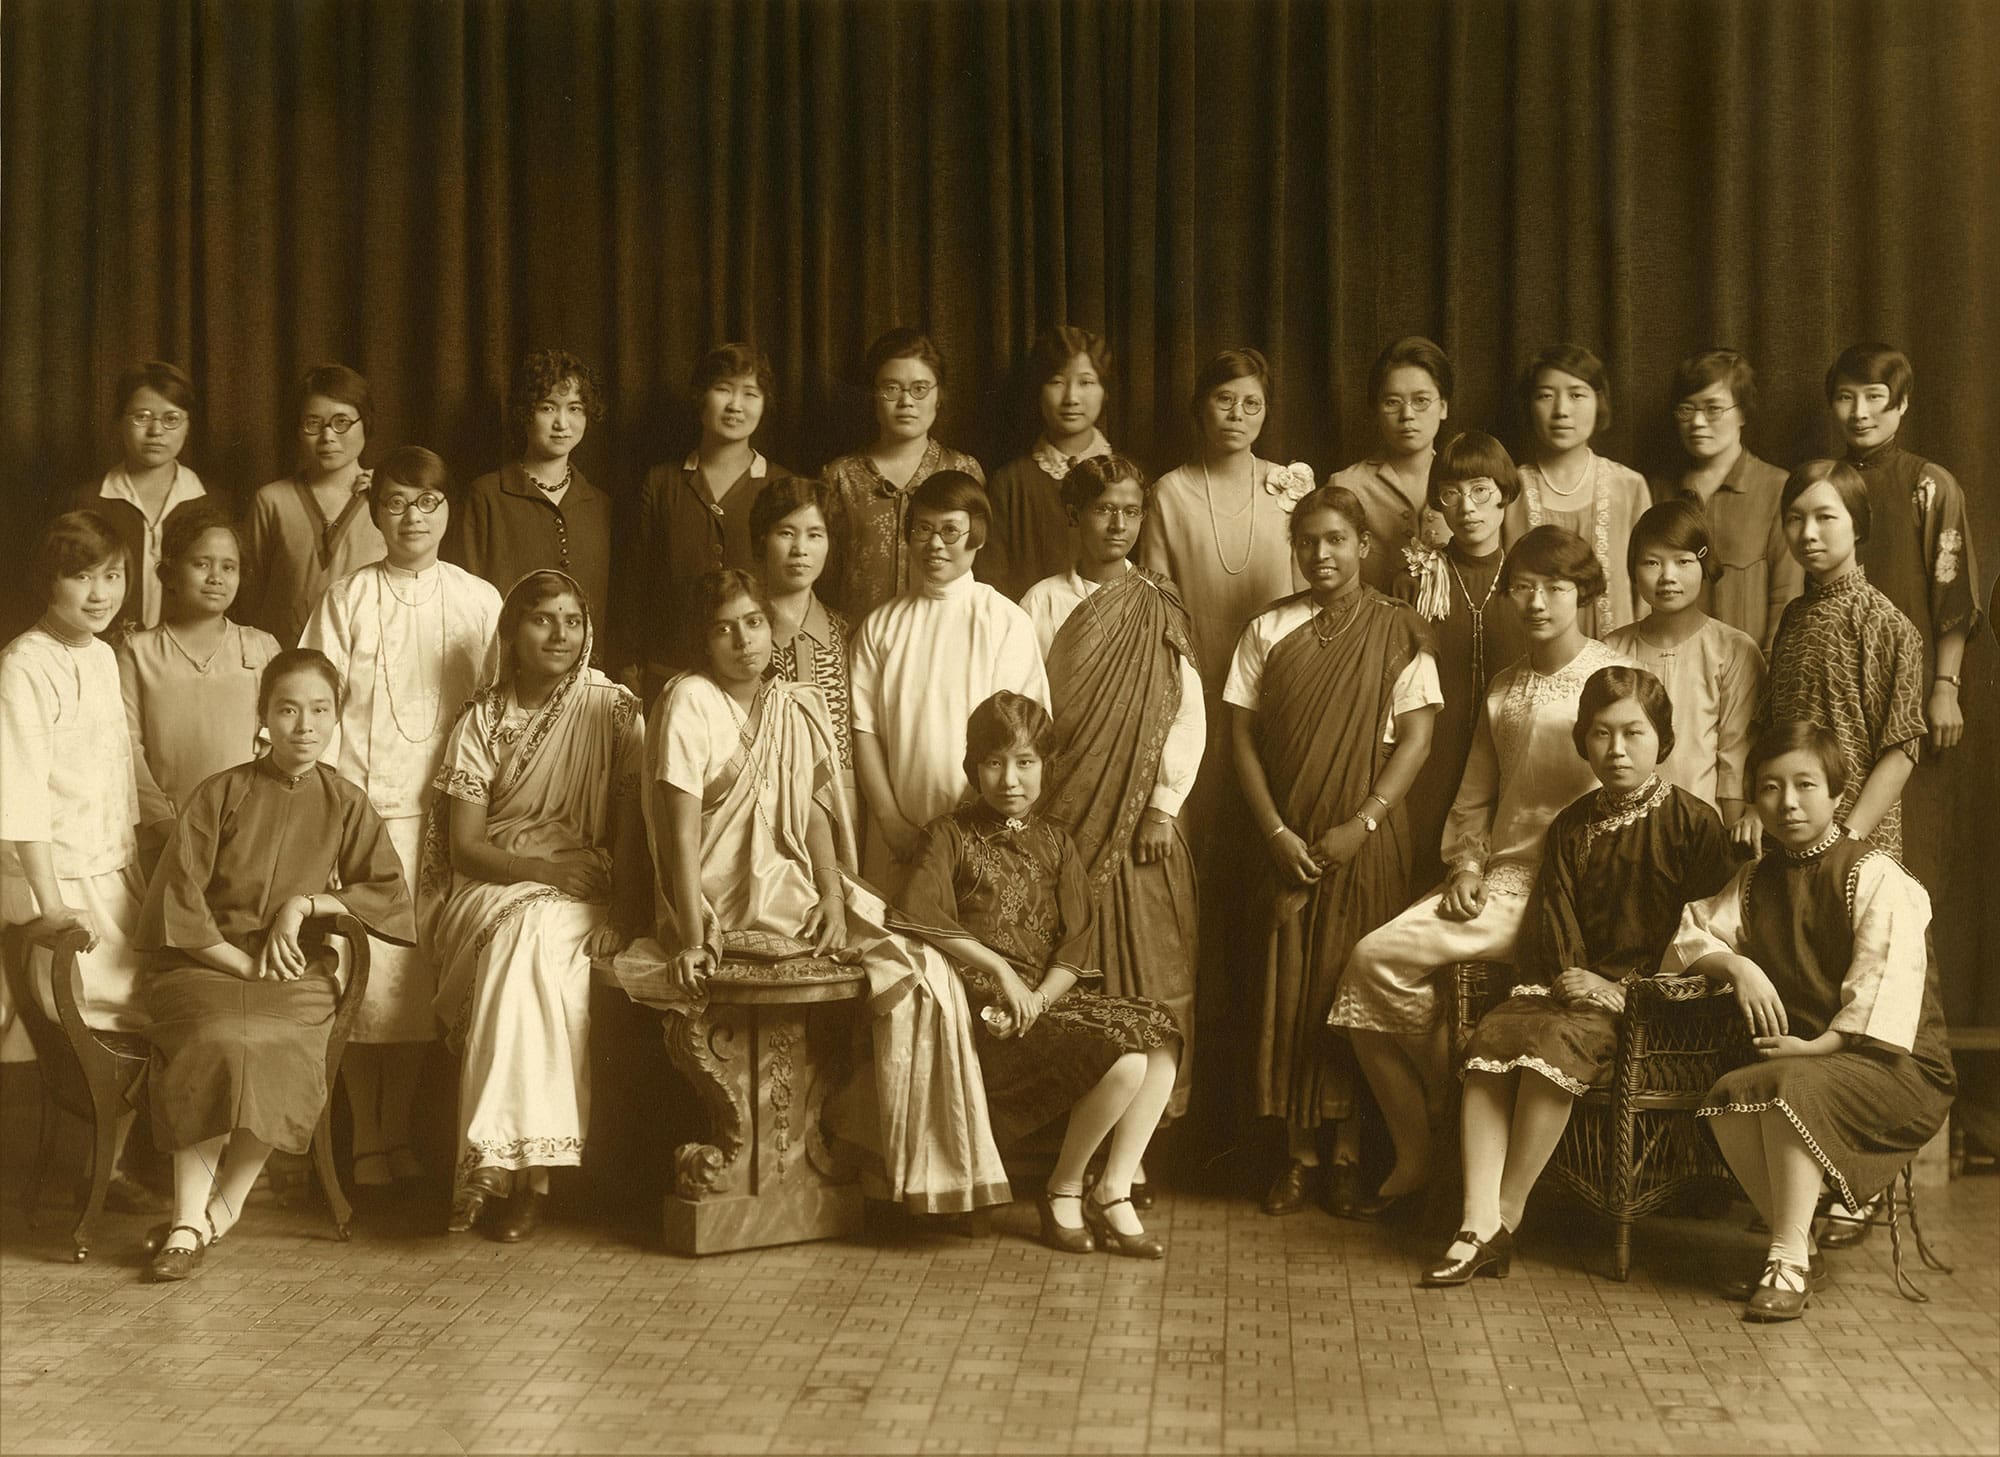 Barbour scholars and fellows pose for a group photograph.